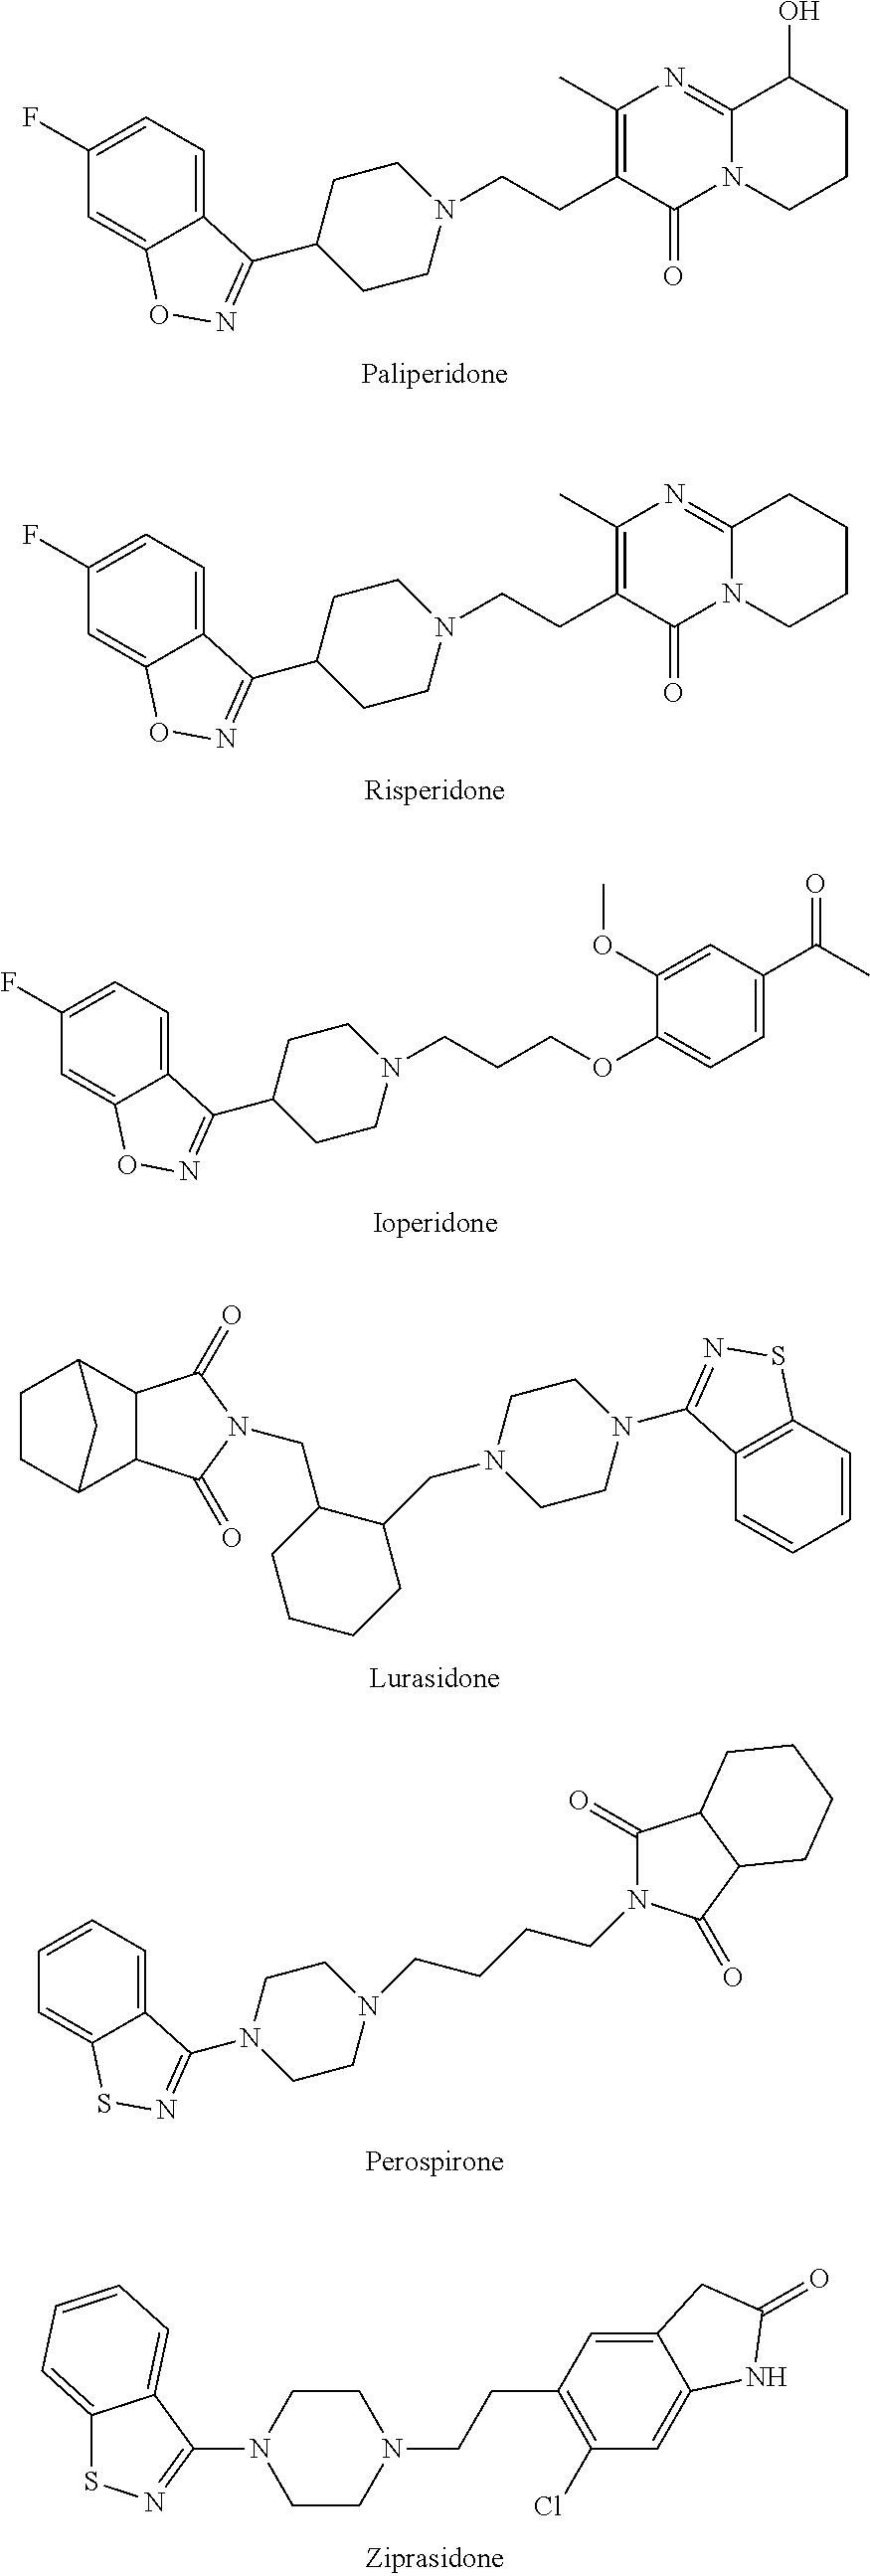 Prodrugs for the Treatment of Schizophrenia and Bipolar Disease